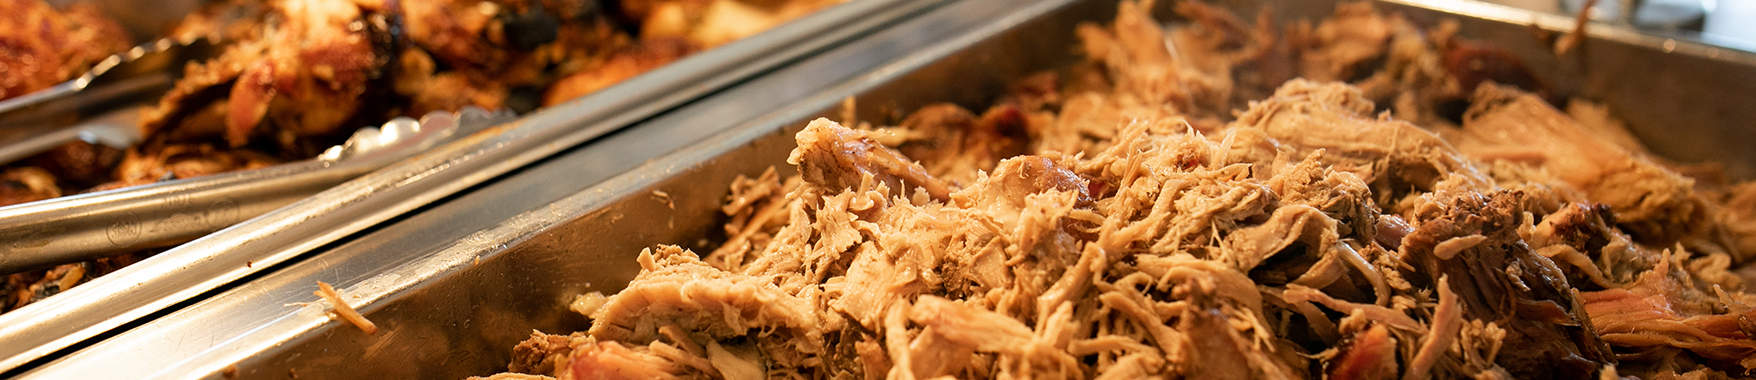 slow-cooked pork in serving tray